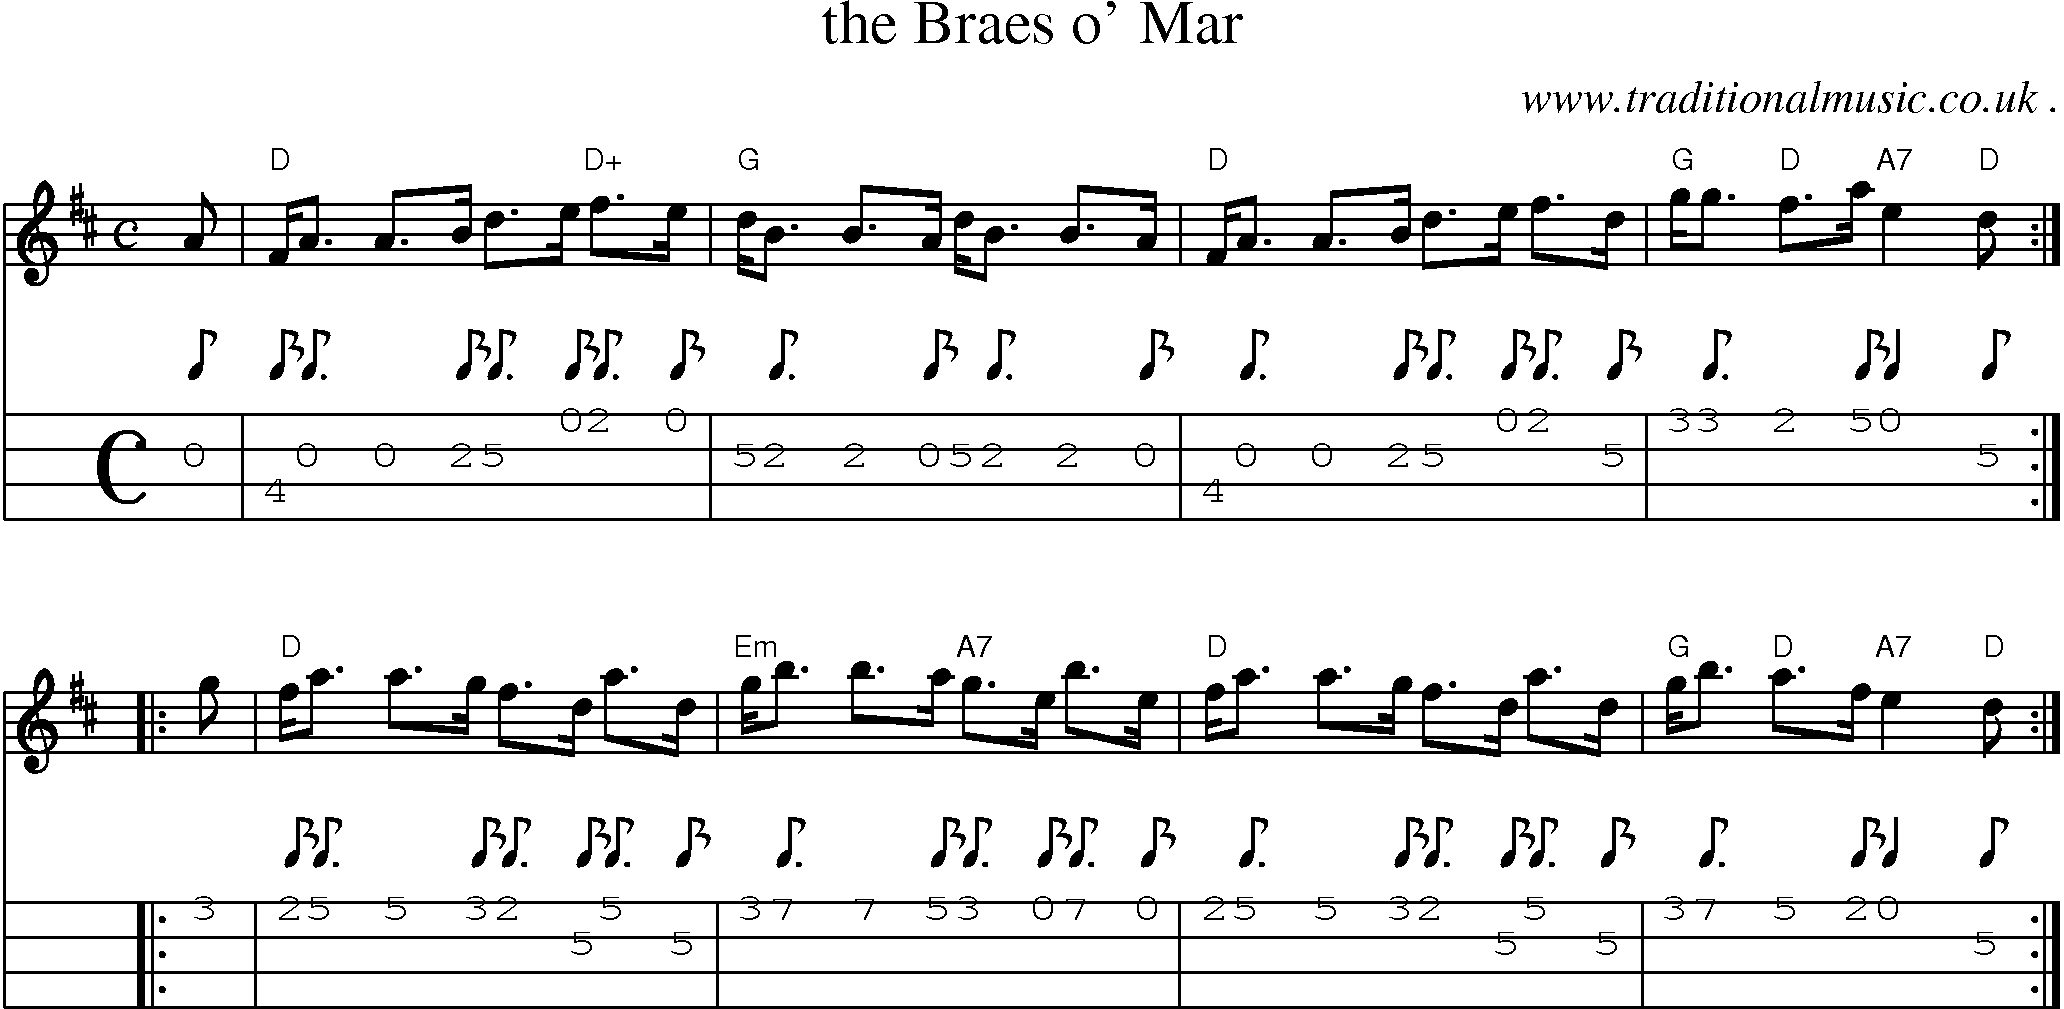 Sheet-music  score, Chords and Mandolin Tabs for The Braes O Mar